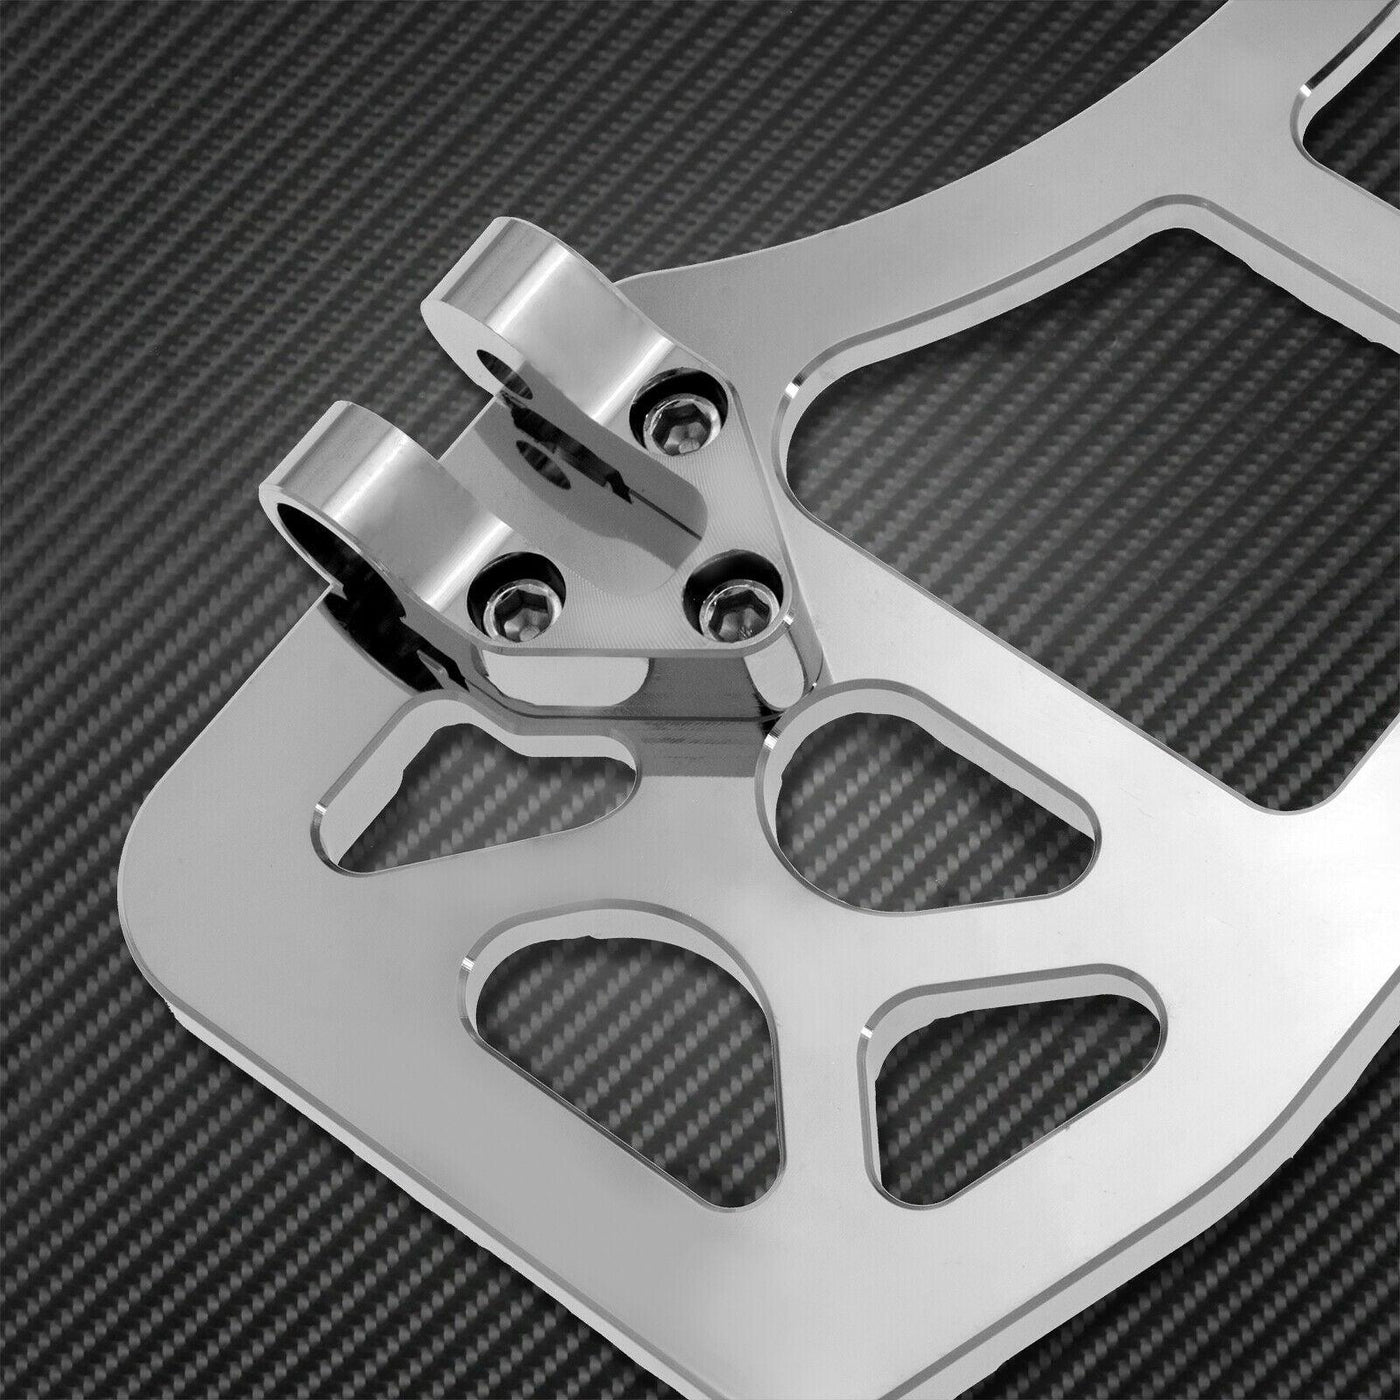 Chrome MX Style Front Driver Floorboard Foot Peg Fit For Harley Touring Trike - Moto Life Products